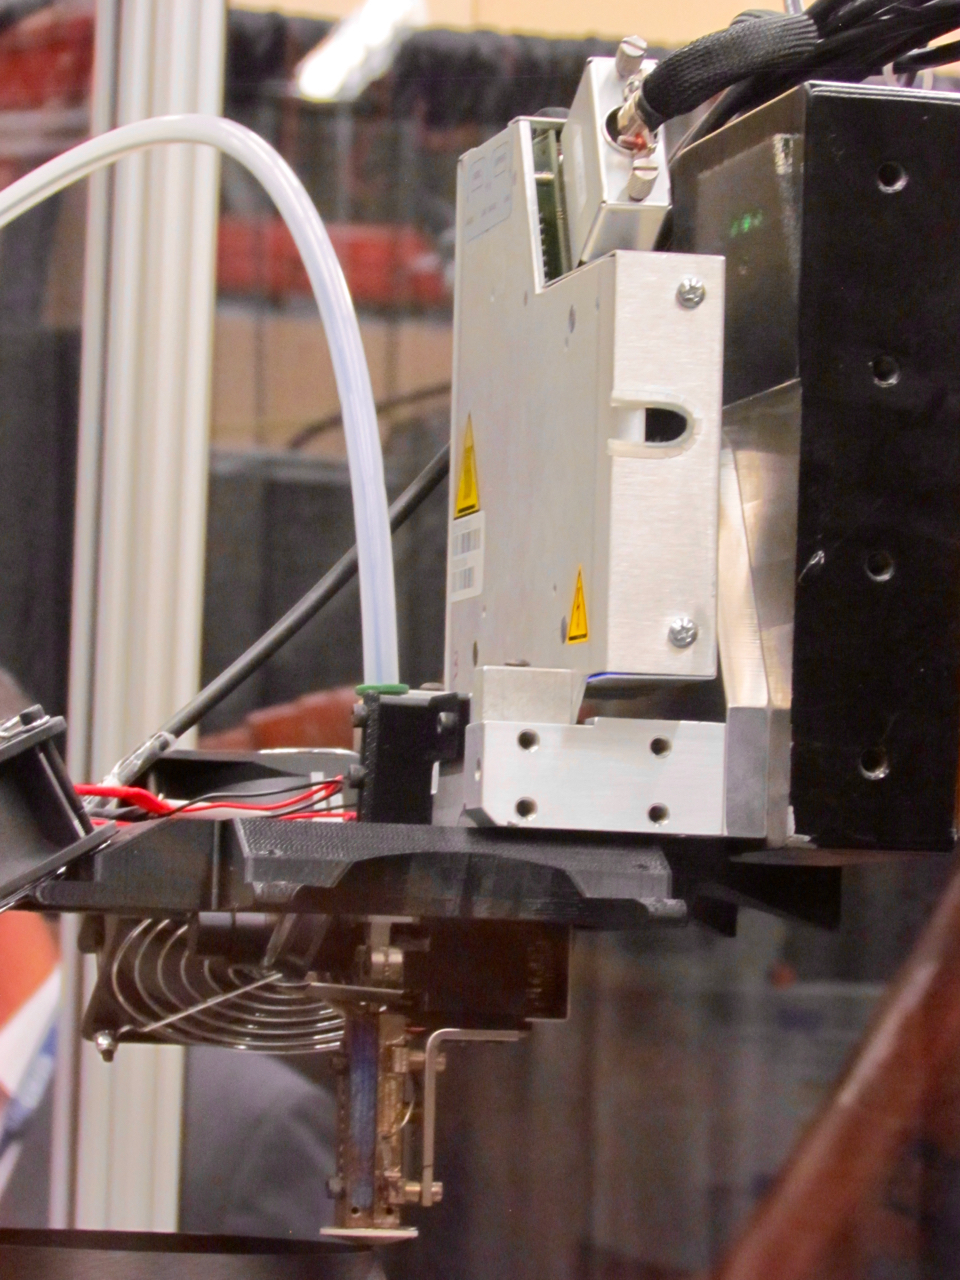  The extruder on the Stratasys Robotic Composite 3D Demonstrator 